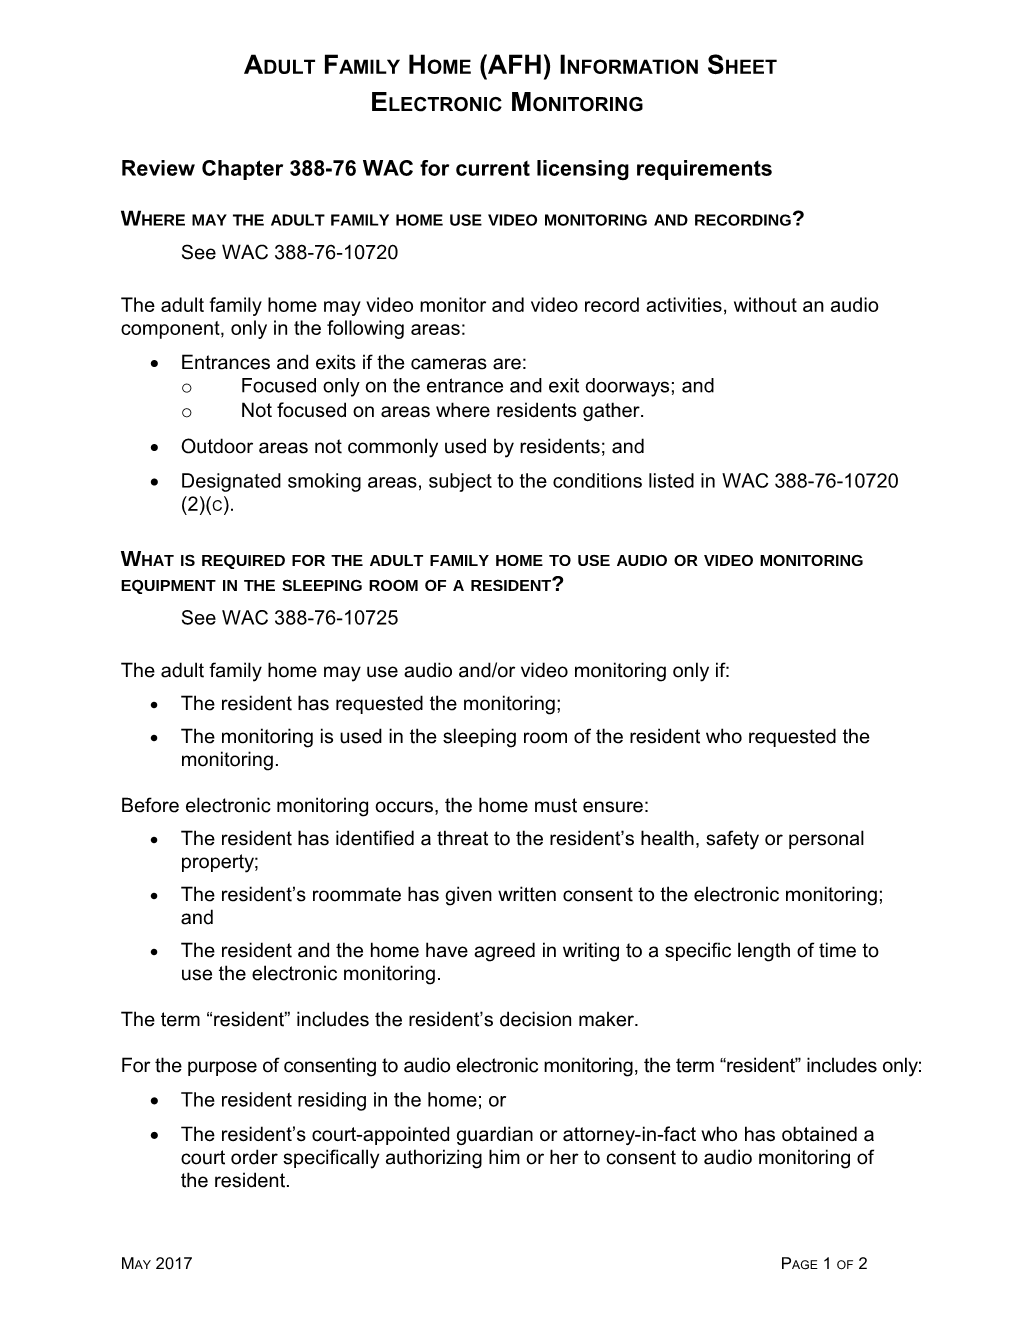 Adult Family Home Electronic Monitoring Information Sheet